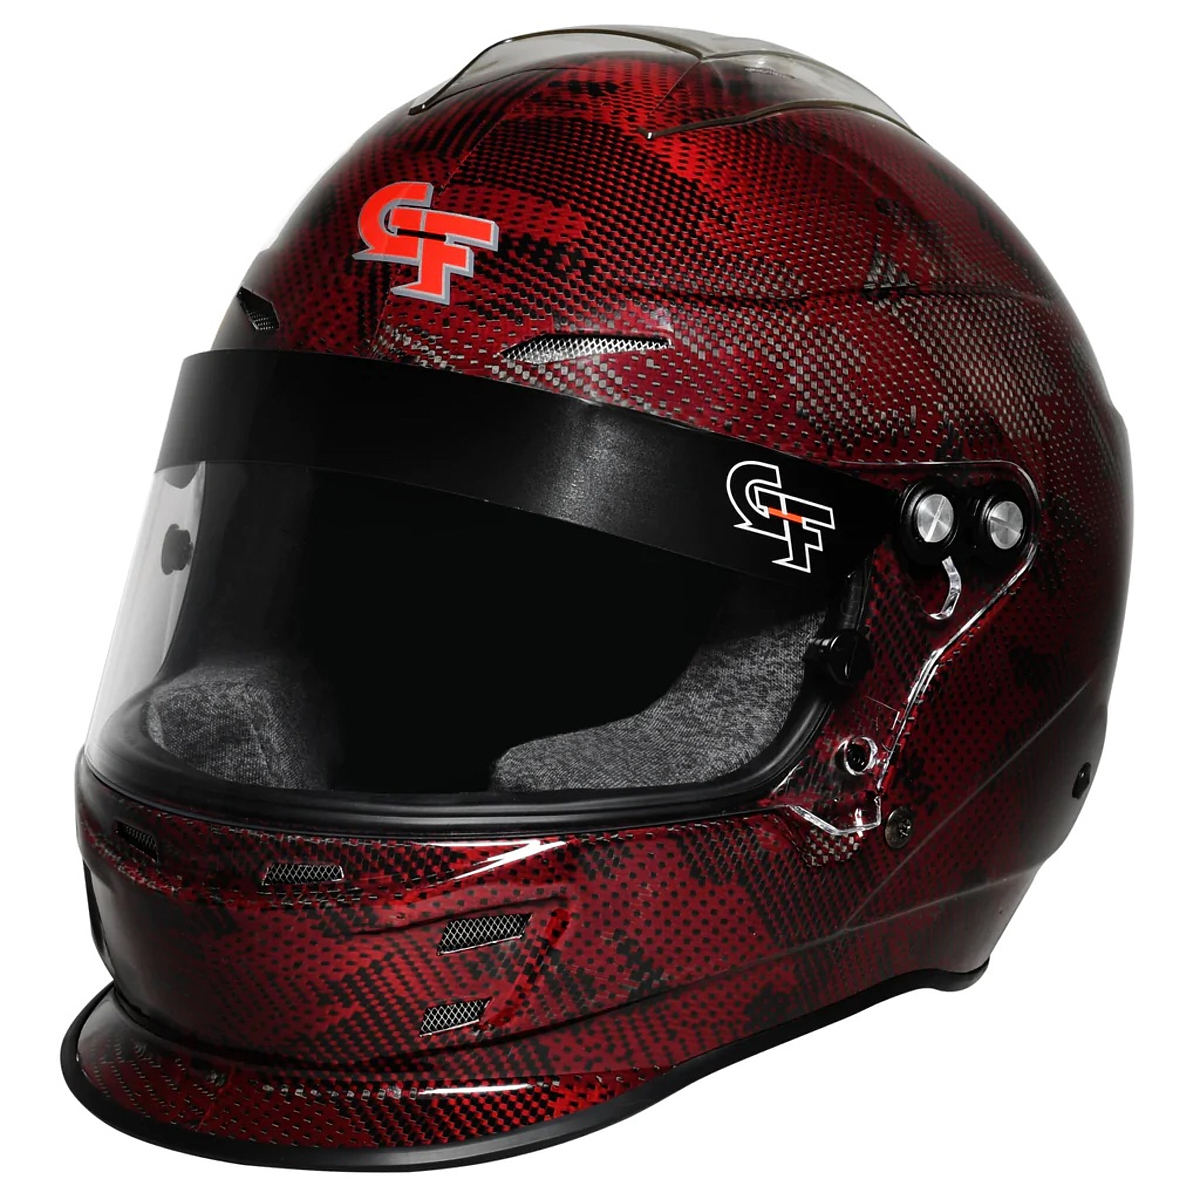 G-Force Racing Gear 16005SMLRD Helmet, Nova Fusion, Full Face, Snell SA 2020, Head and Neck Support Ready, Red, Small, Each